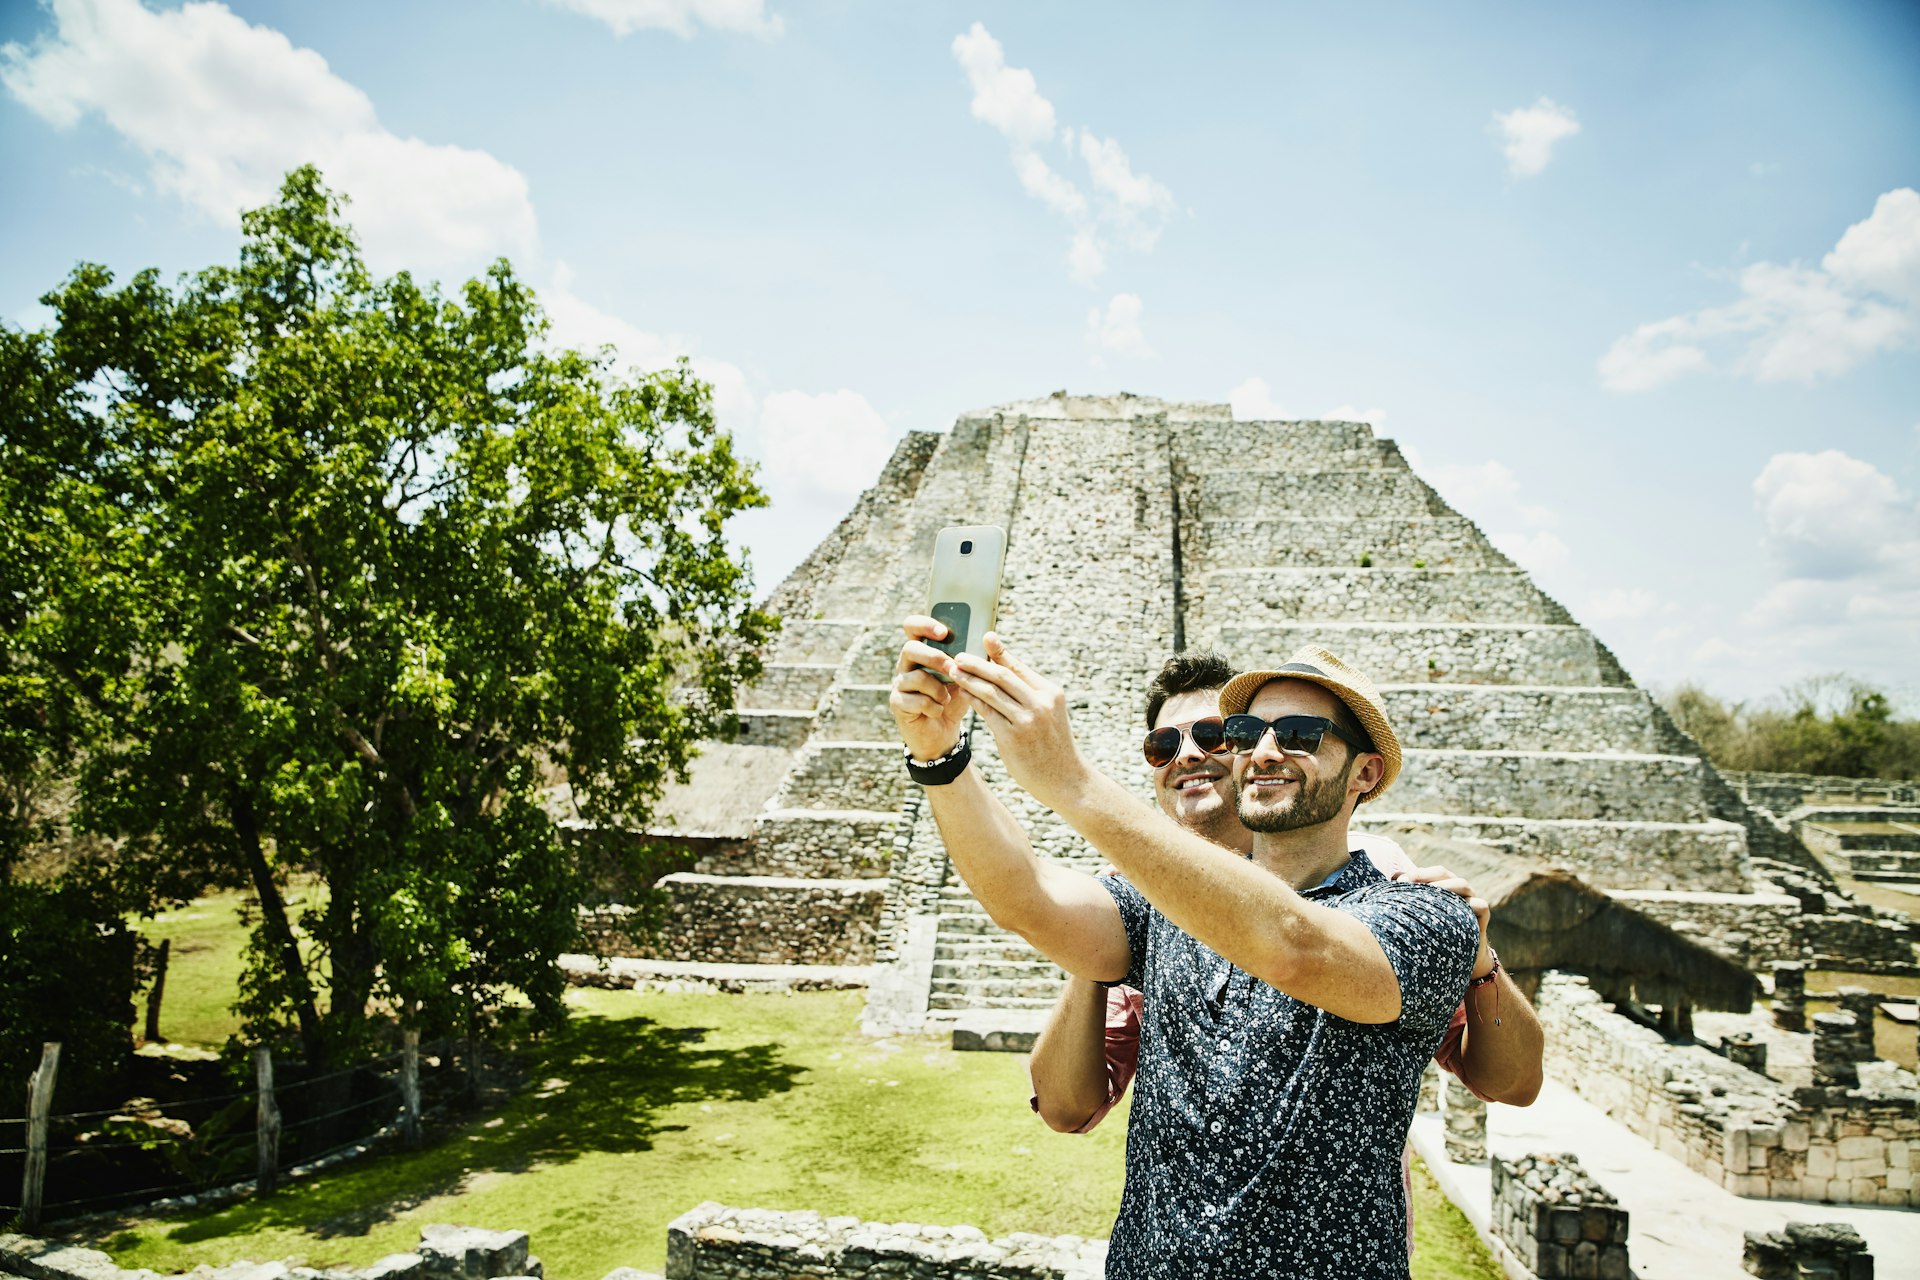 A couple posing for a selfie together in front of the Mayapan ruins in Mexico, on a gloriously sunny day.